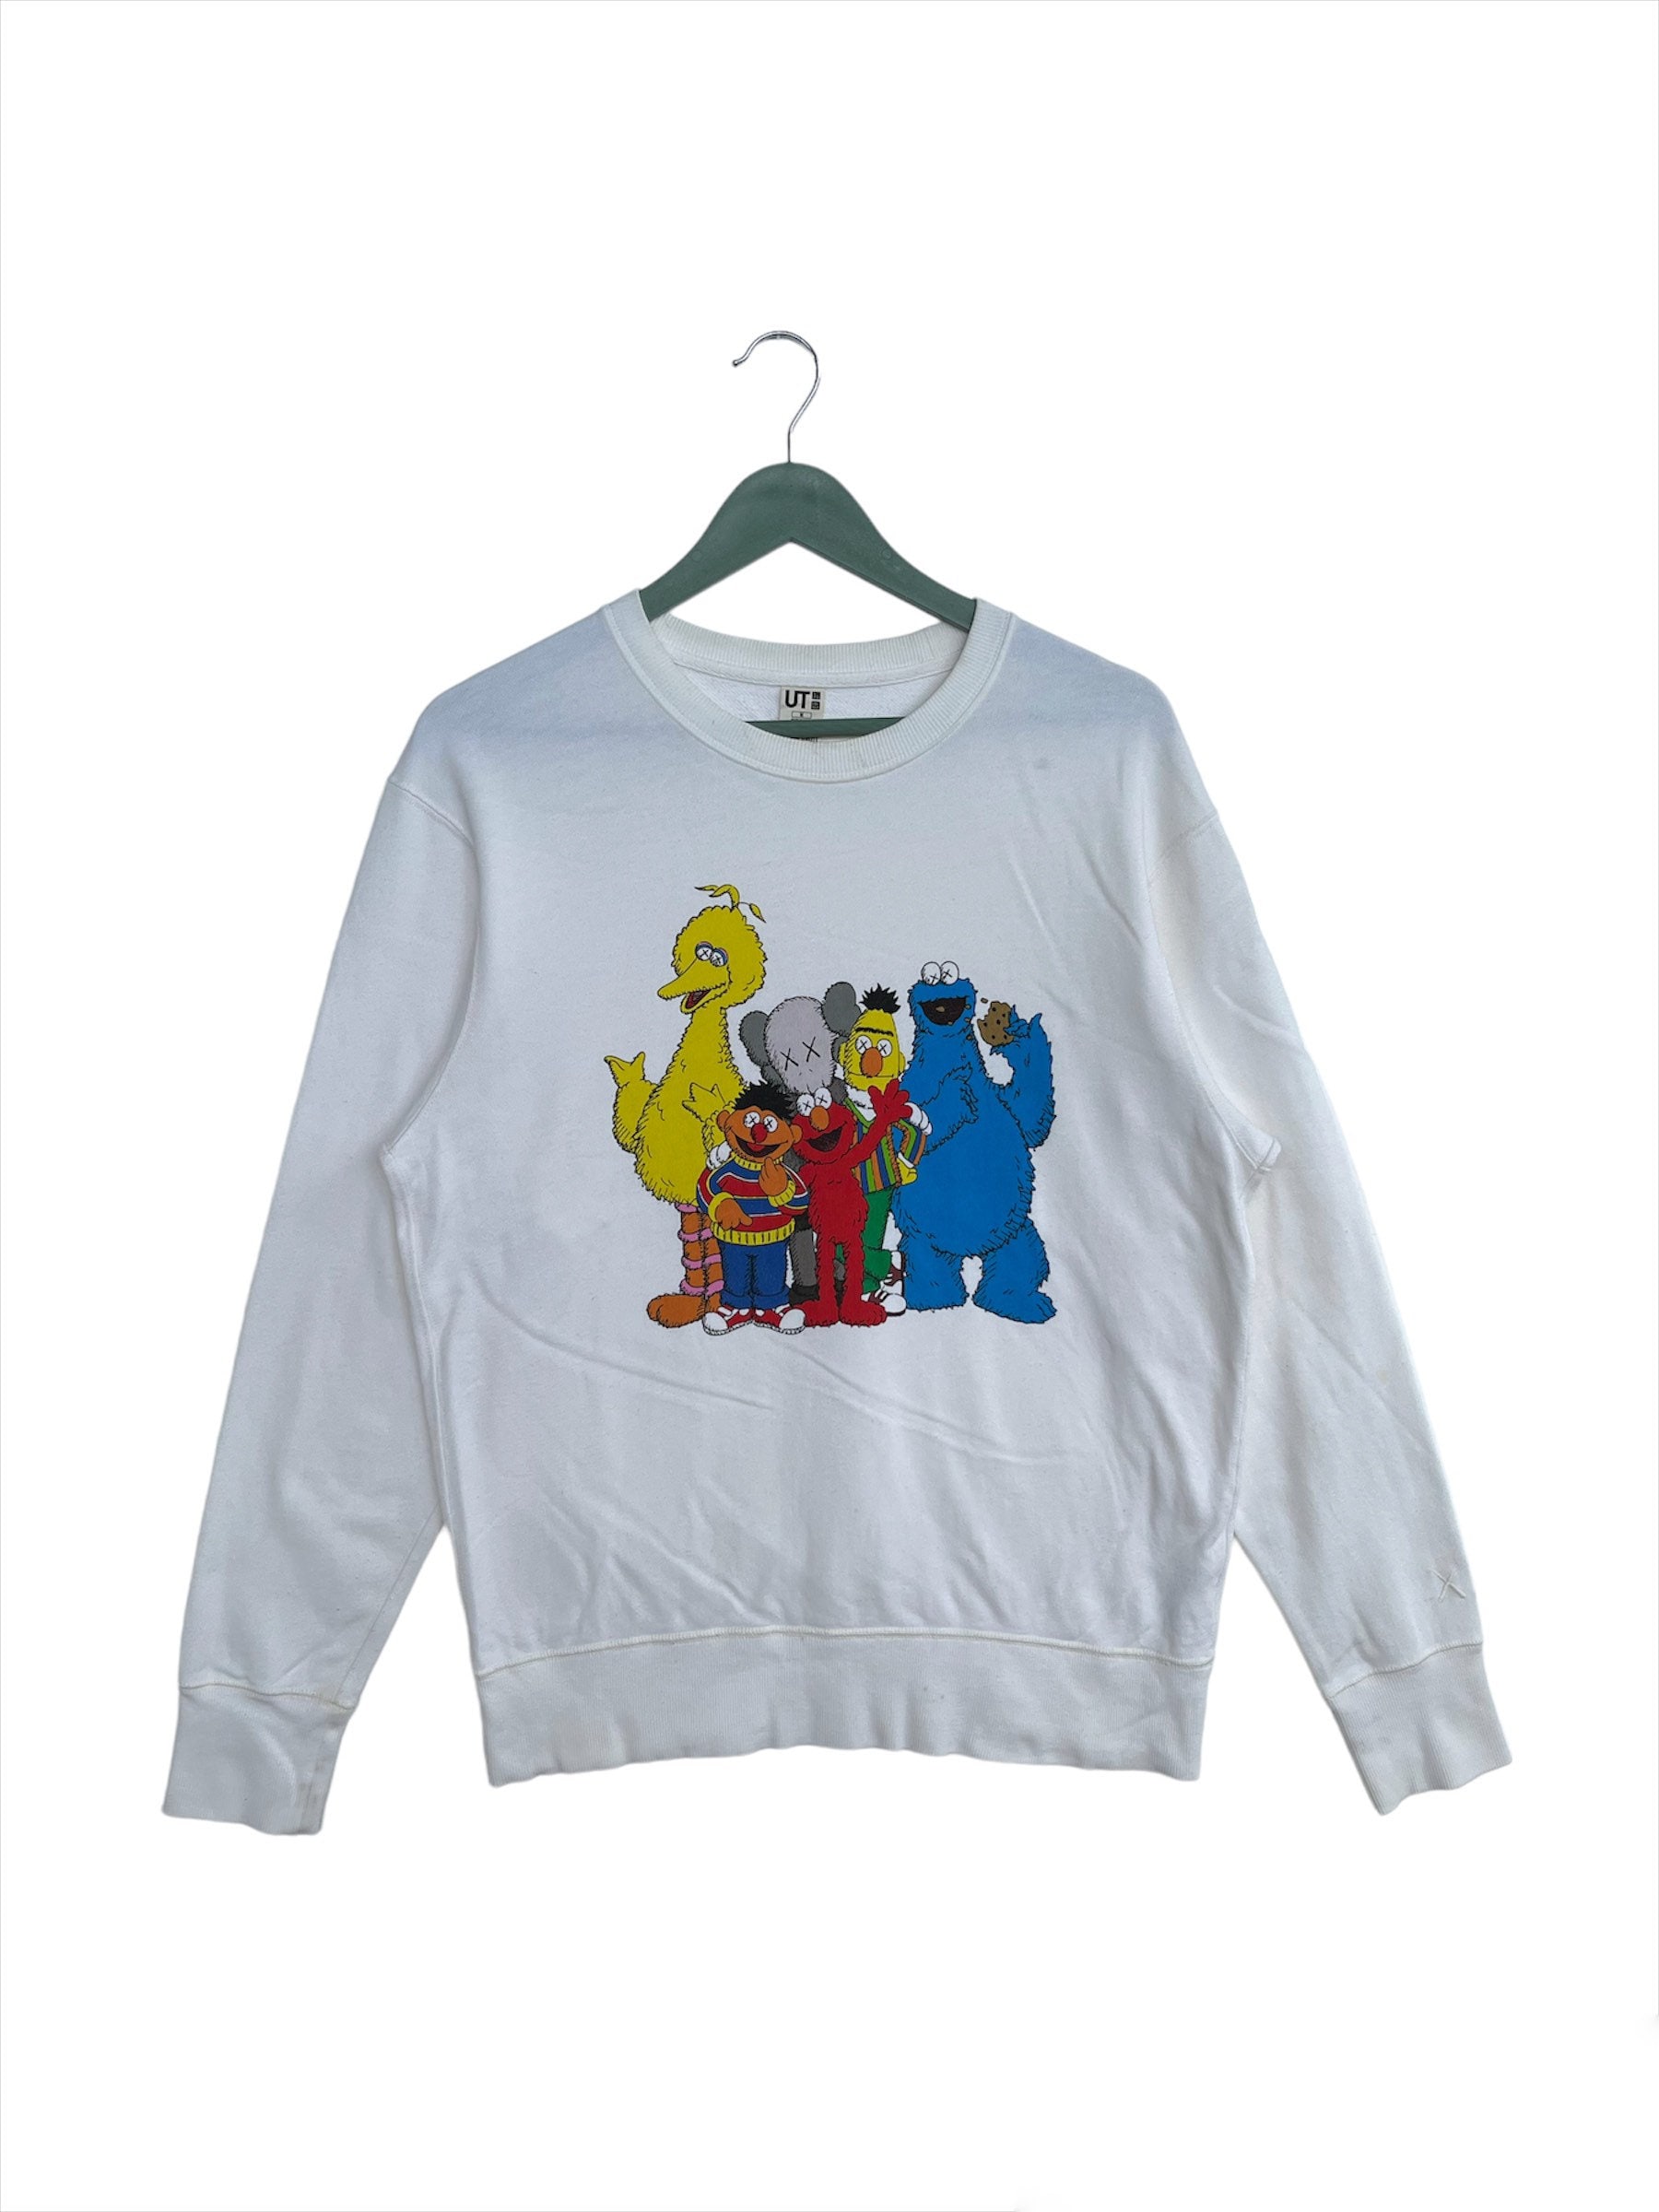 Ready For Volume 2 Of Uniqlo's KAWS x Sesame Street UT Collection? Includes  Plush Toys! - TODAY